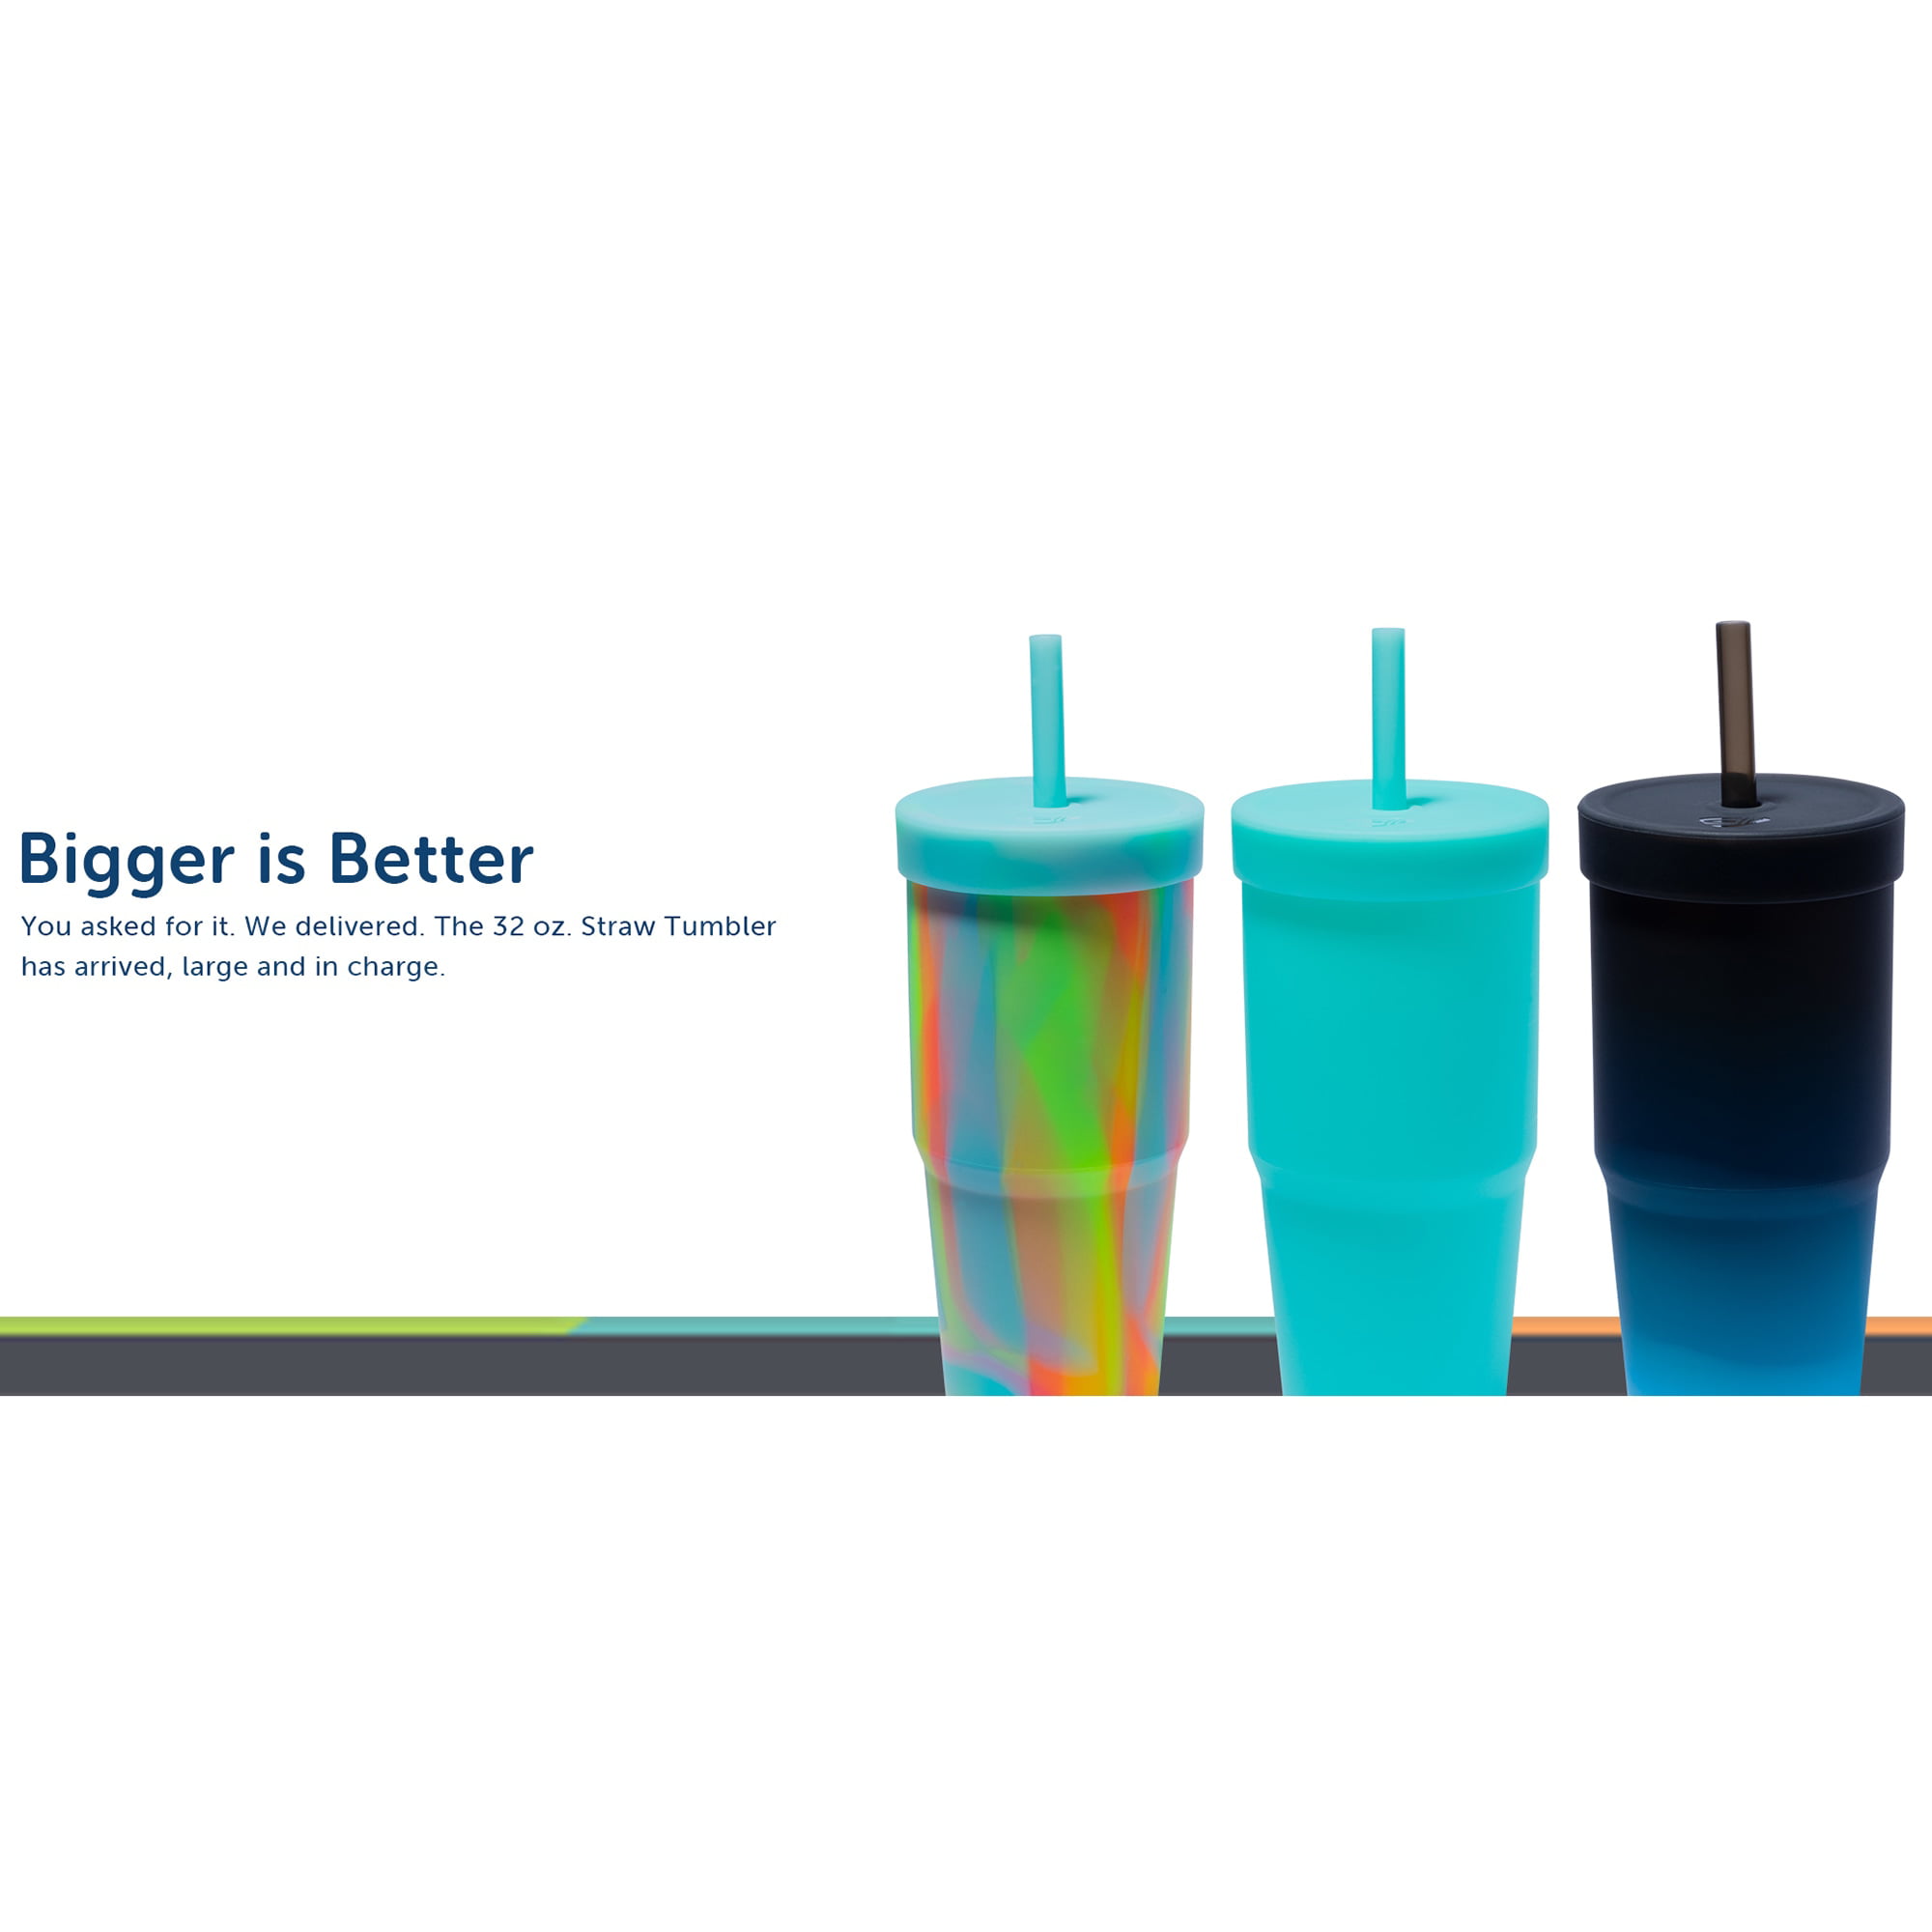 Silipint: Silicone 32oz Straw Tumbler: Sugar Rush - Reusable Unbreakable Cup, Flexible, Hot/Cold, Airtight Lid - Multi